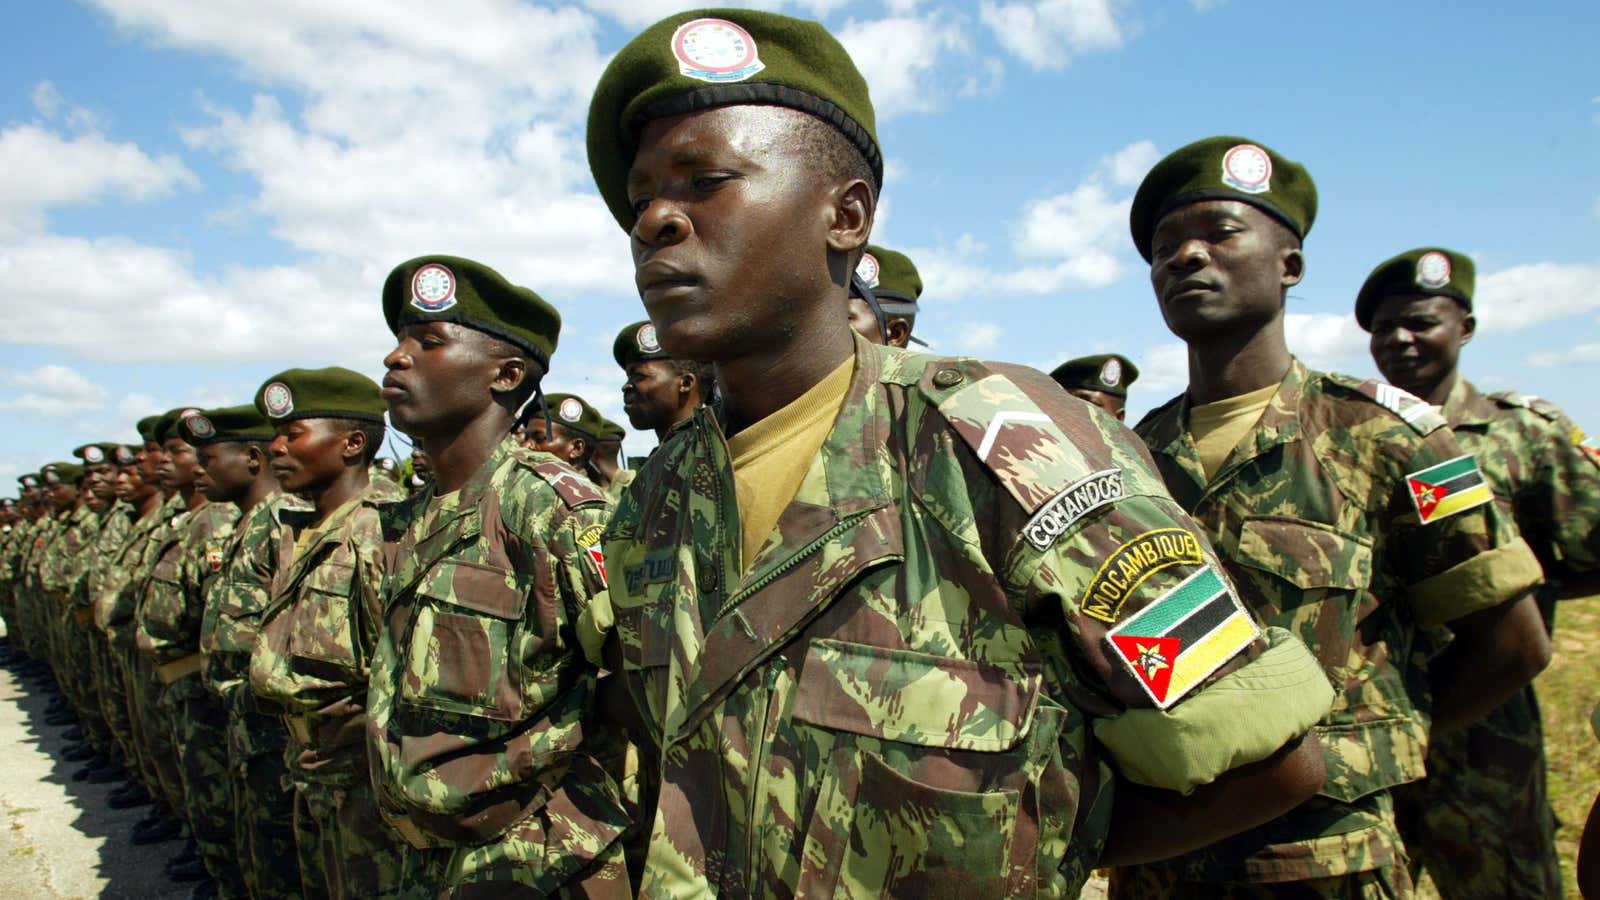 Mozambique’s Defence Force Army will be readying themselves for the Islamist terrorist group